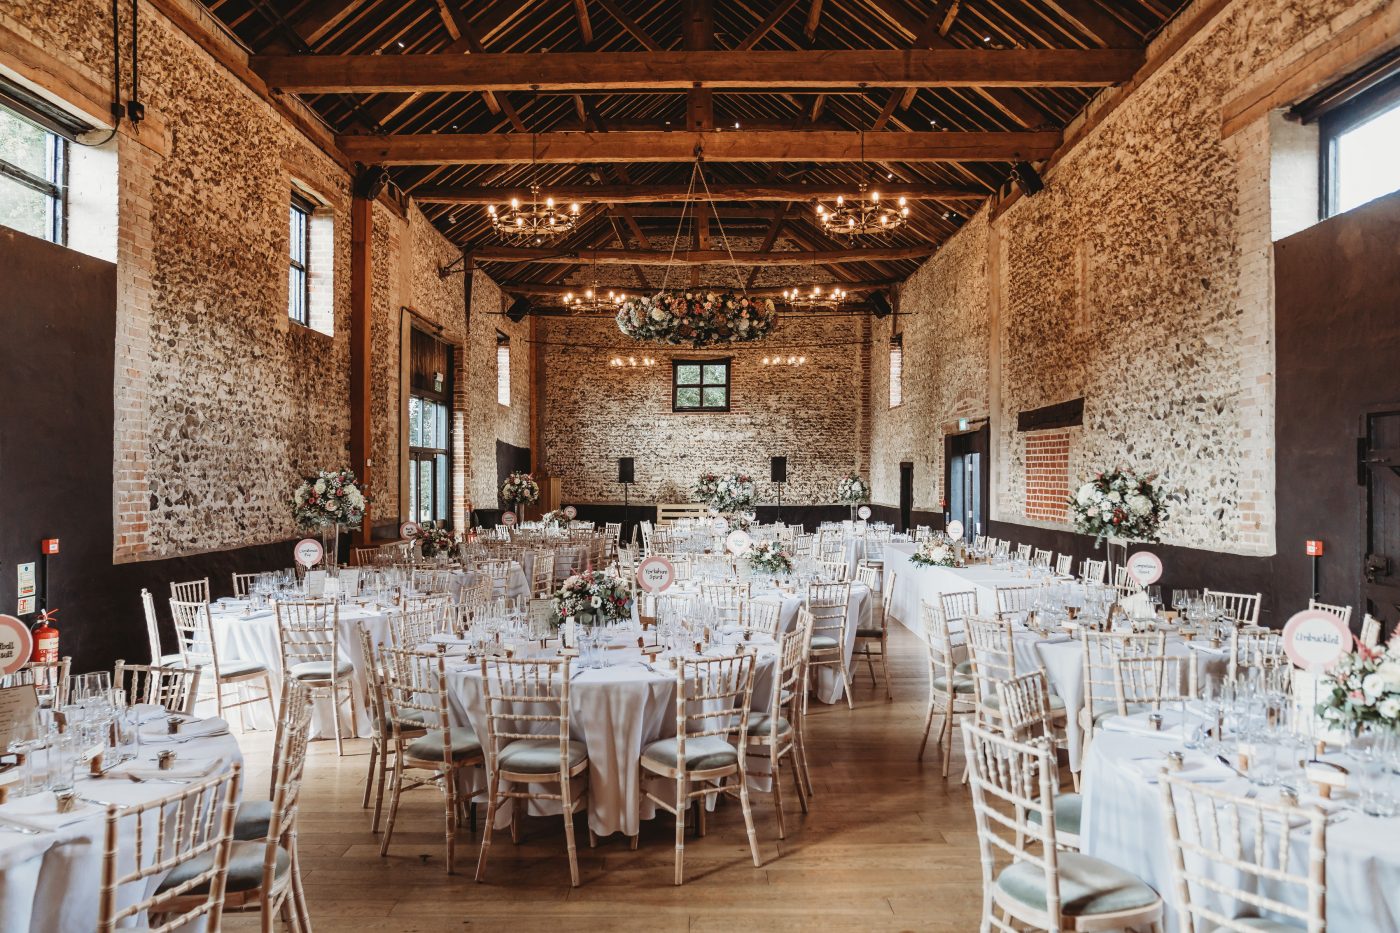 Decorate Style Your Wedding Venue, How To Decorate Wedding Venue On A Budget